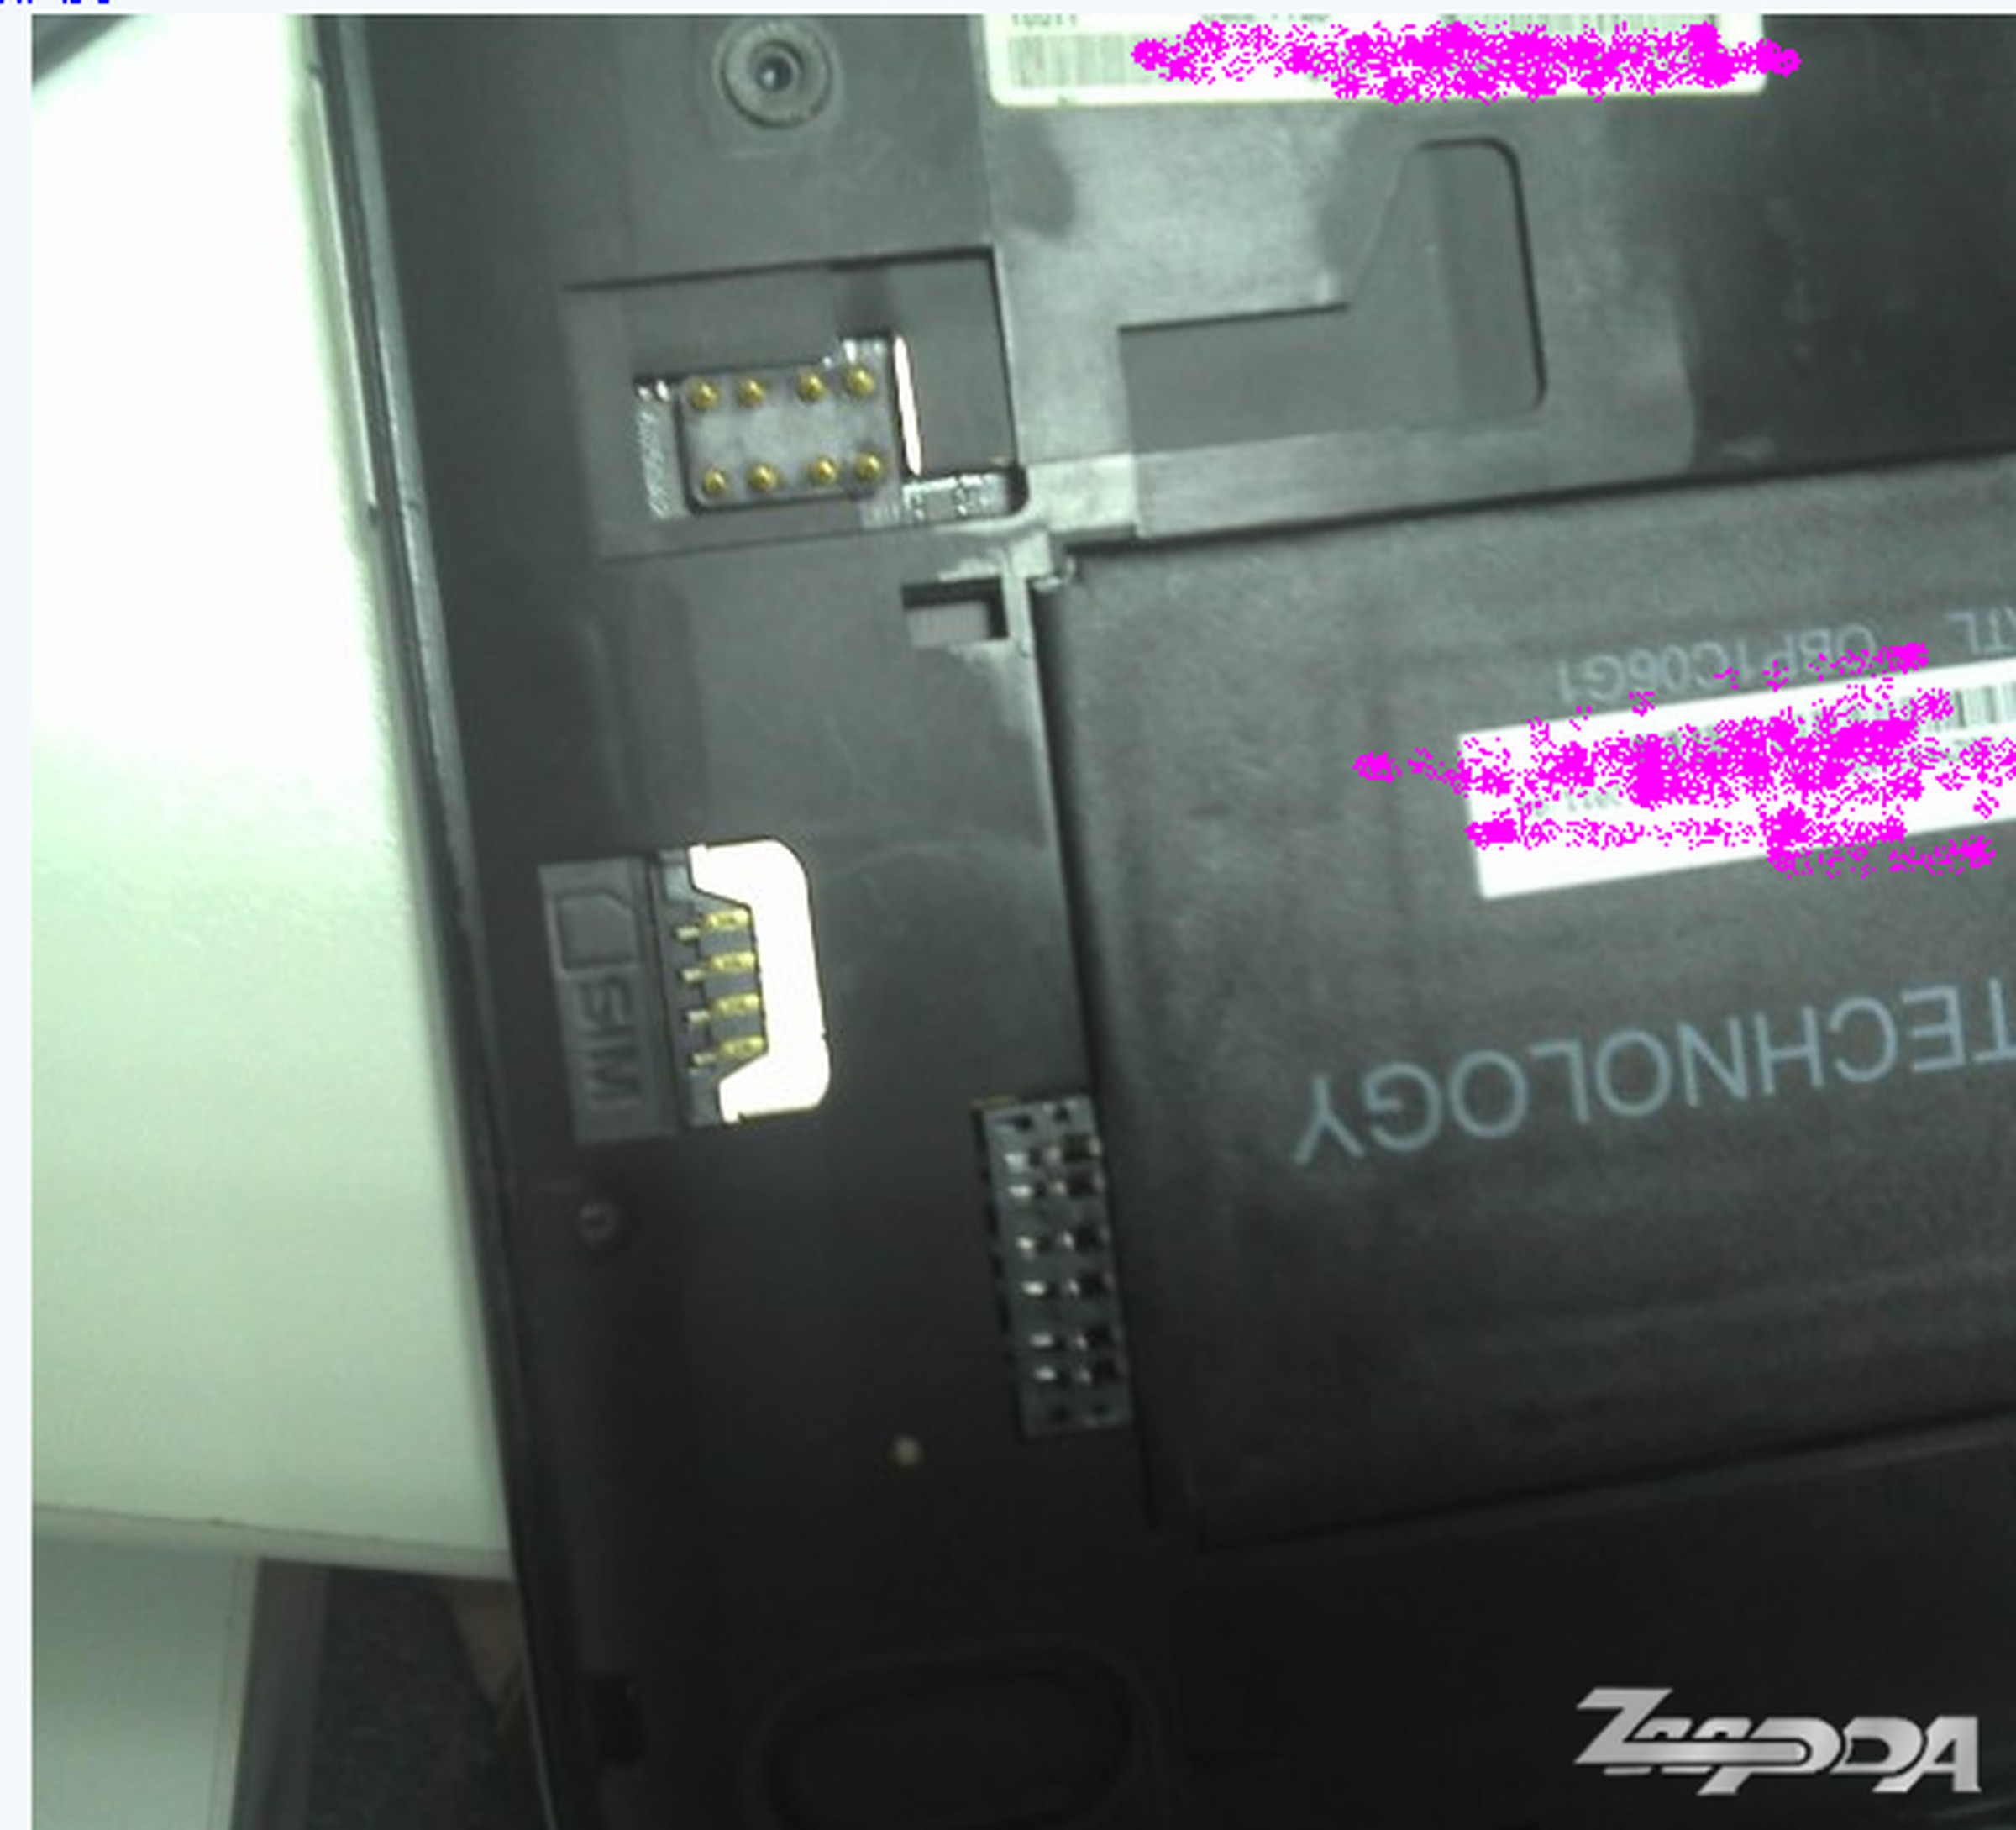 7-inch HP TouchPad leaks out